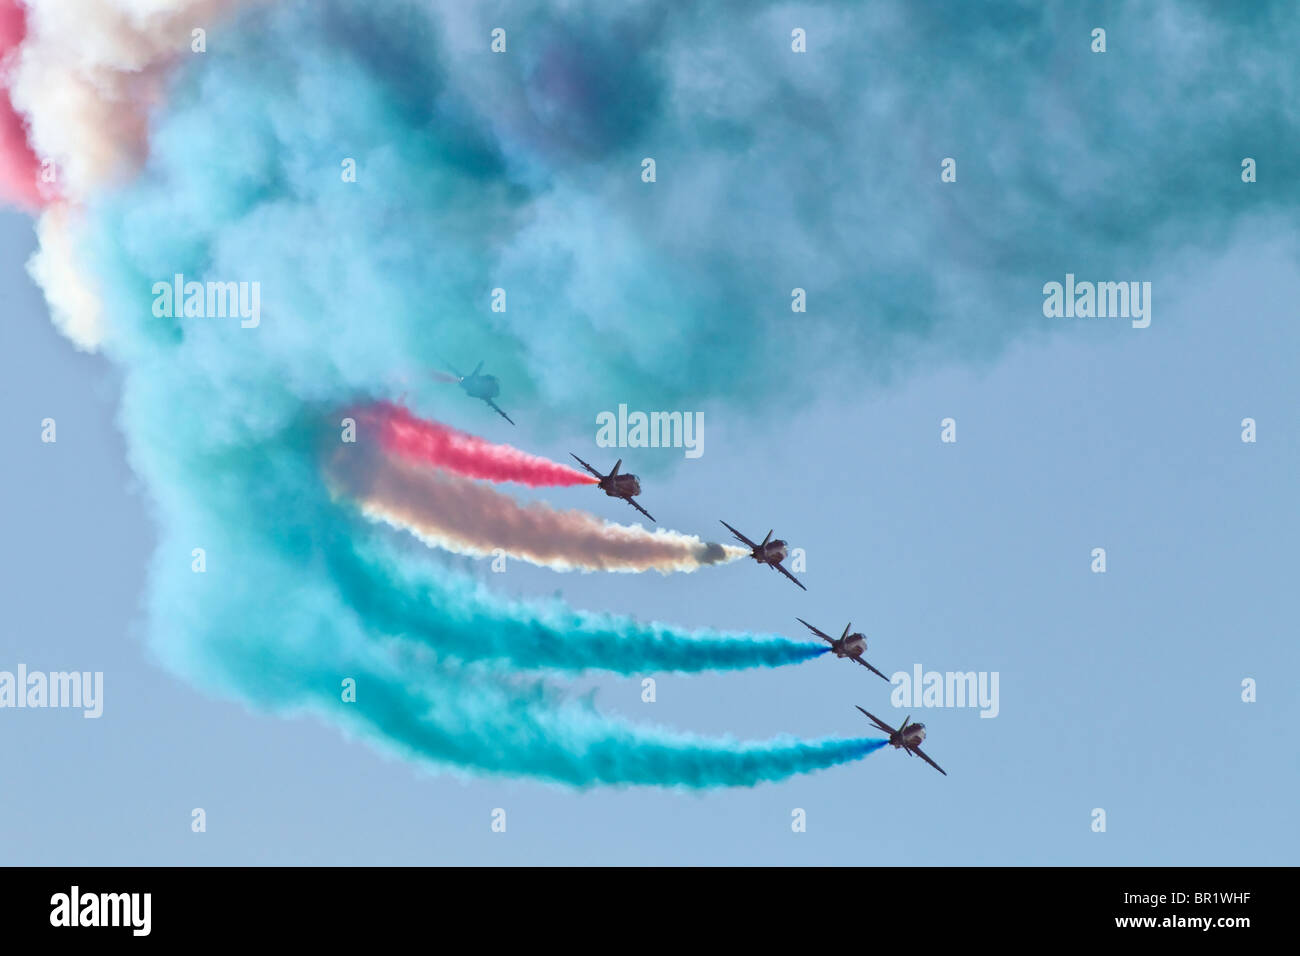 Display smoke from the RAF's Red Arrows formation aerobatic team Stock Photo